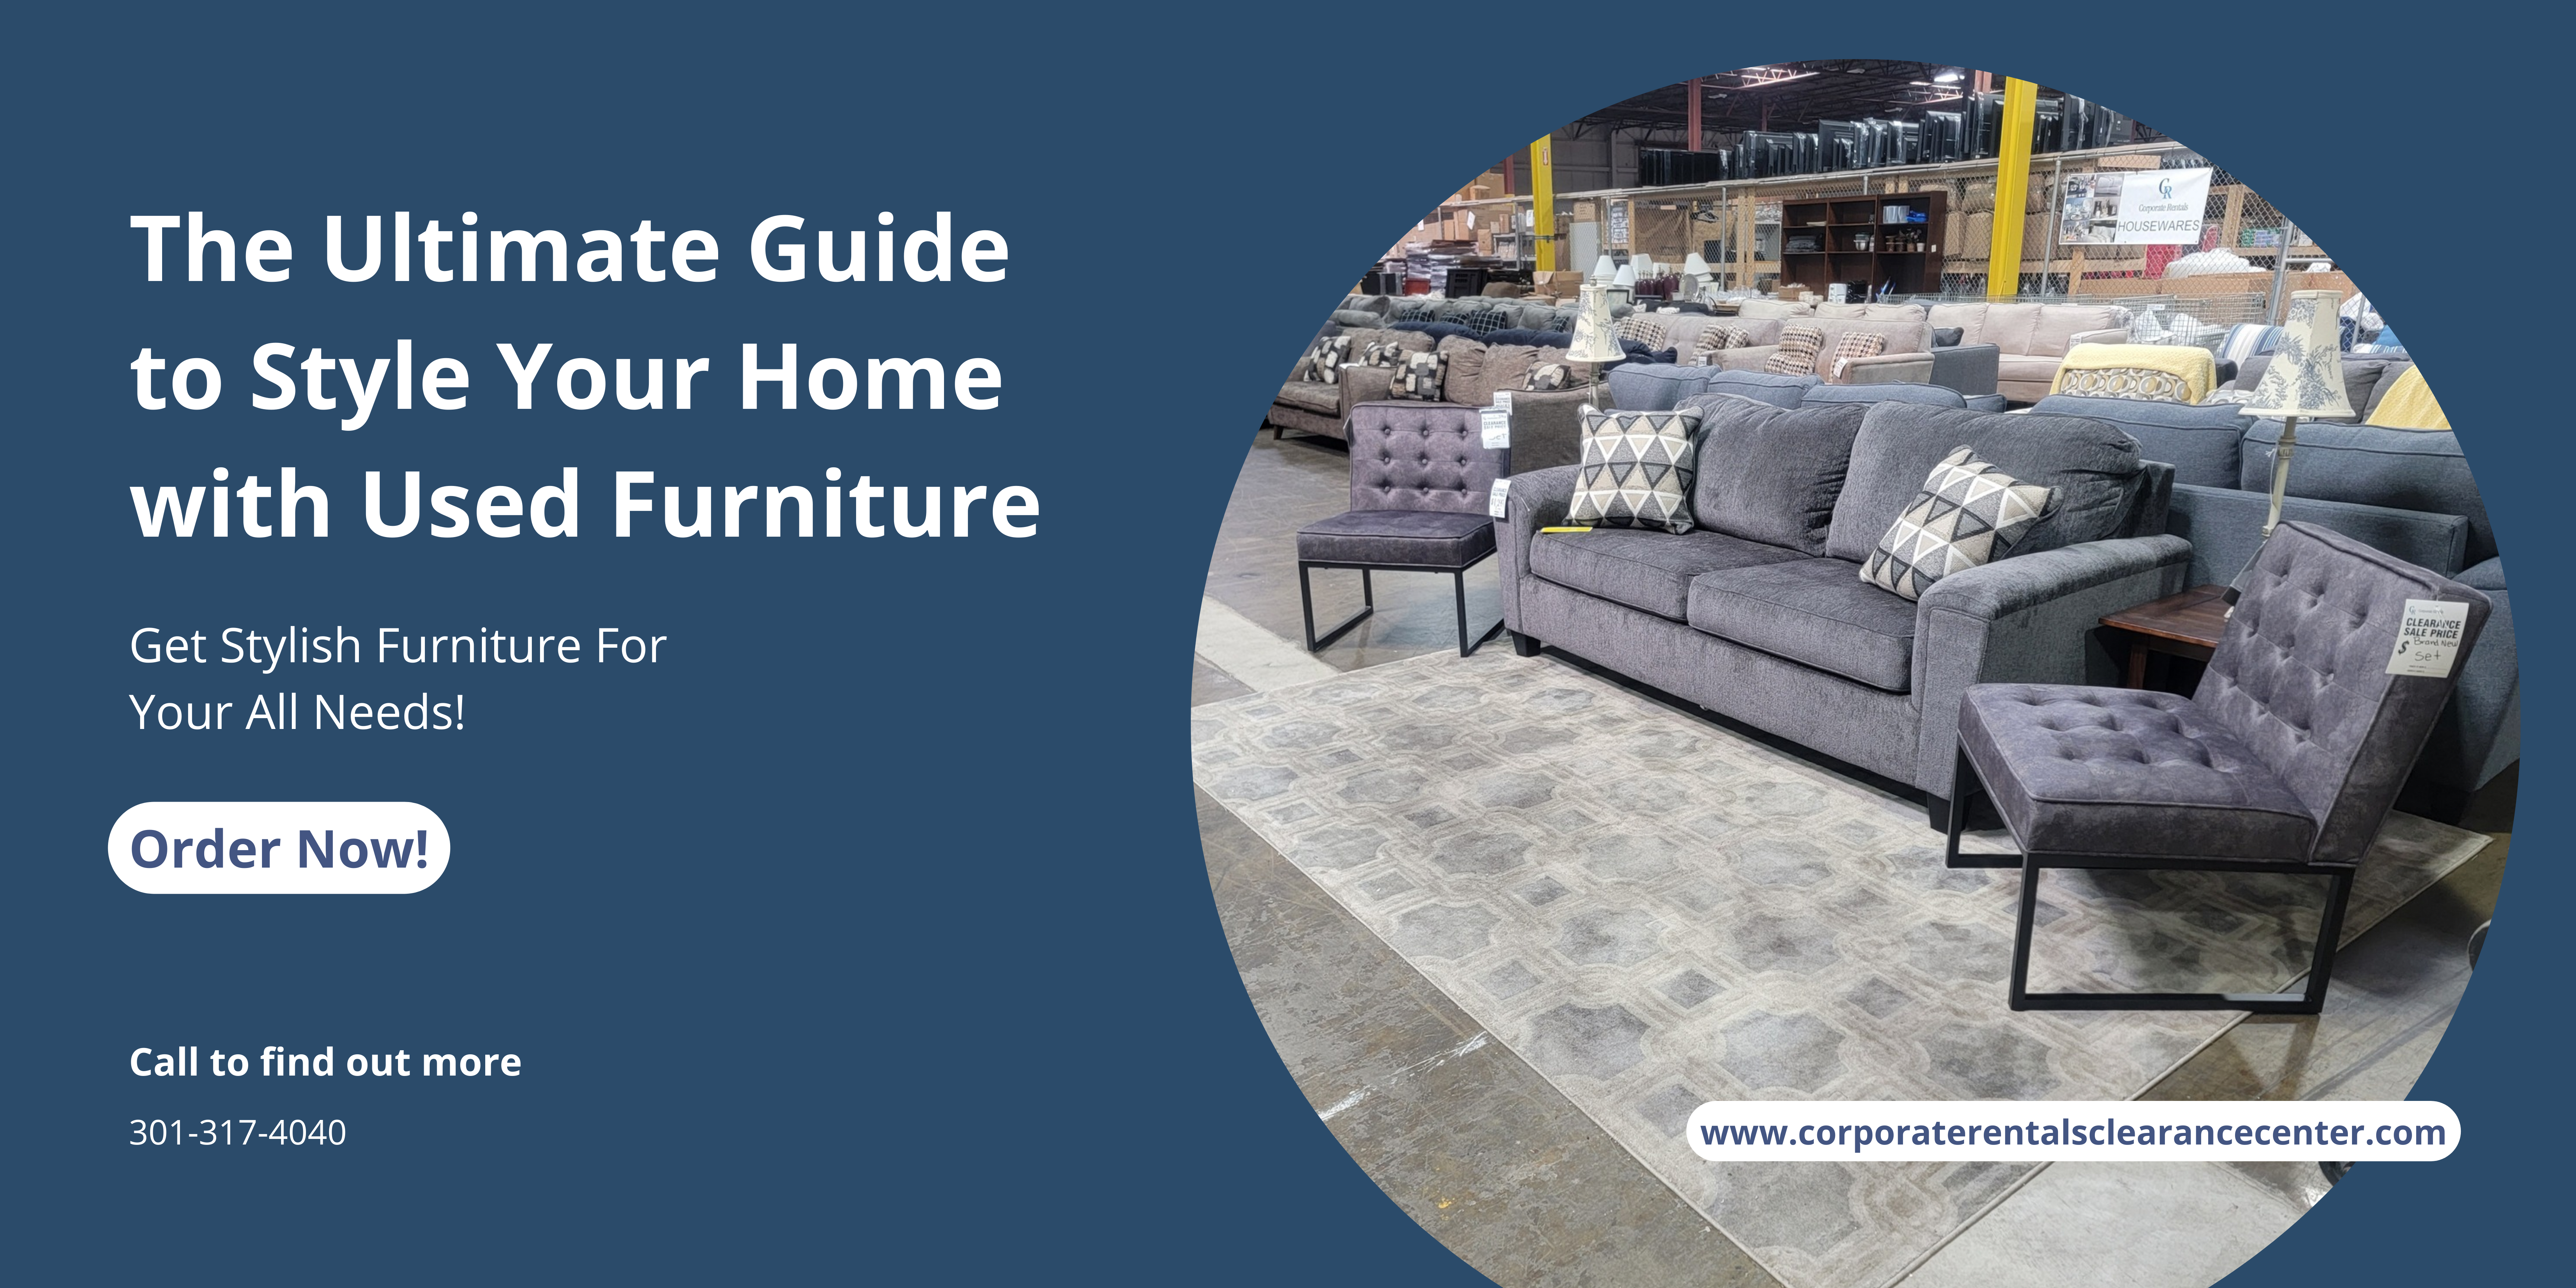 The Ultimate Guide to Style Your Home with Used Furniture